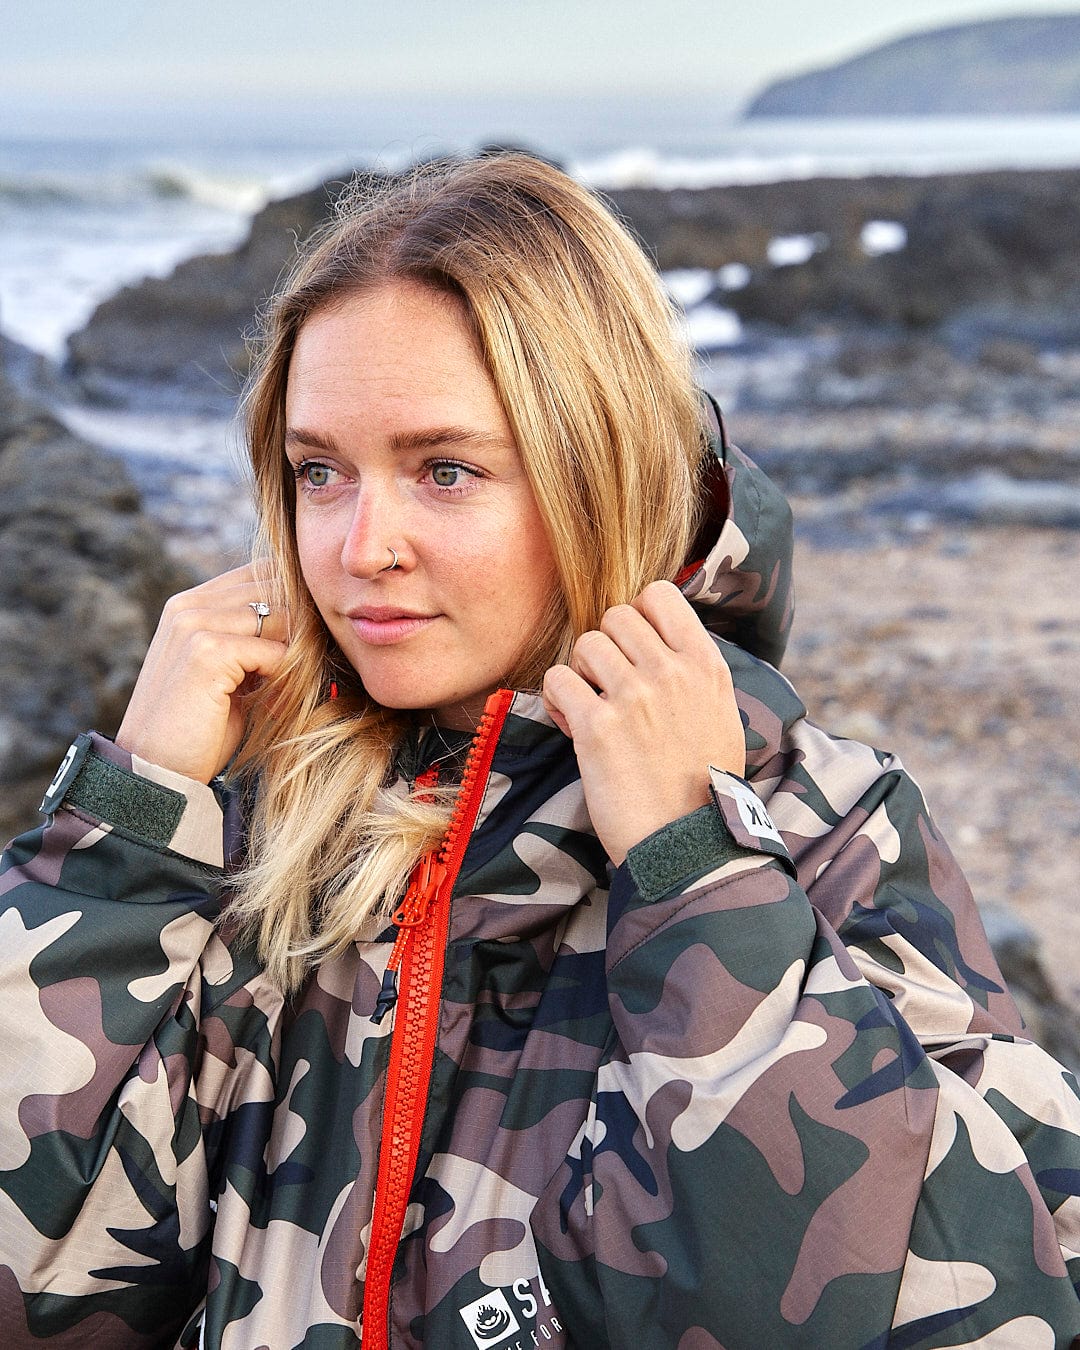 A woman wearing a Saltrock camouflage jacket on the beach.